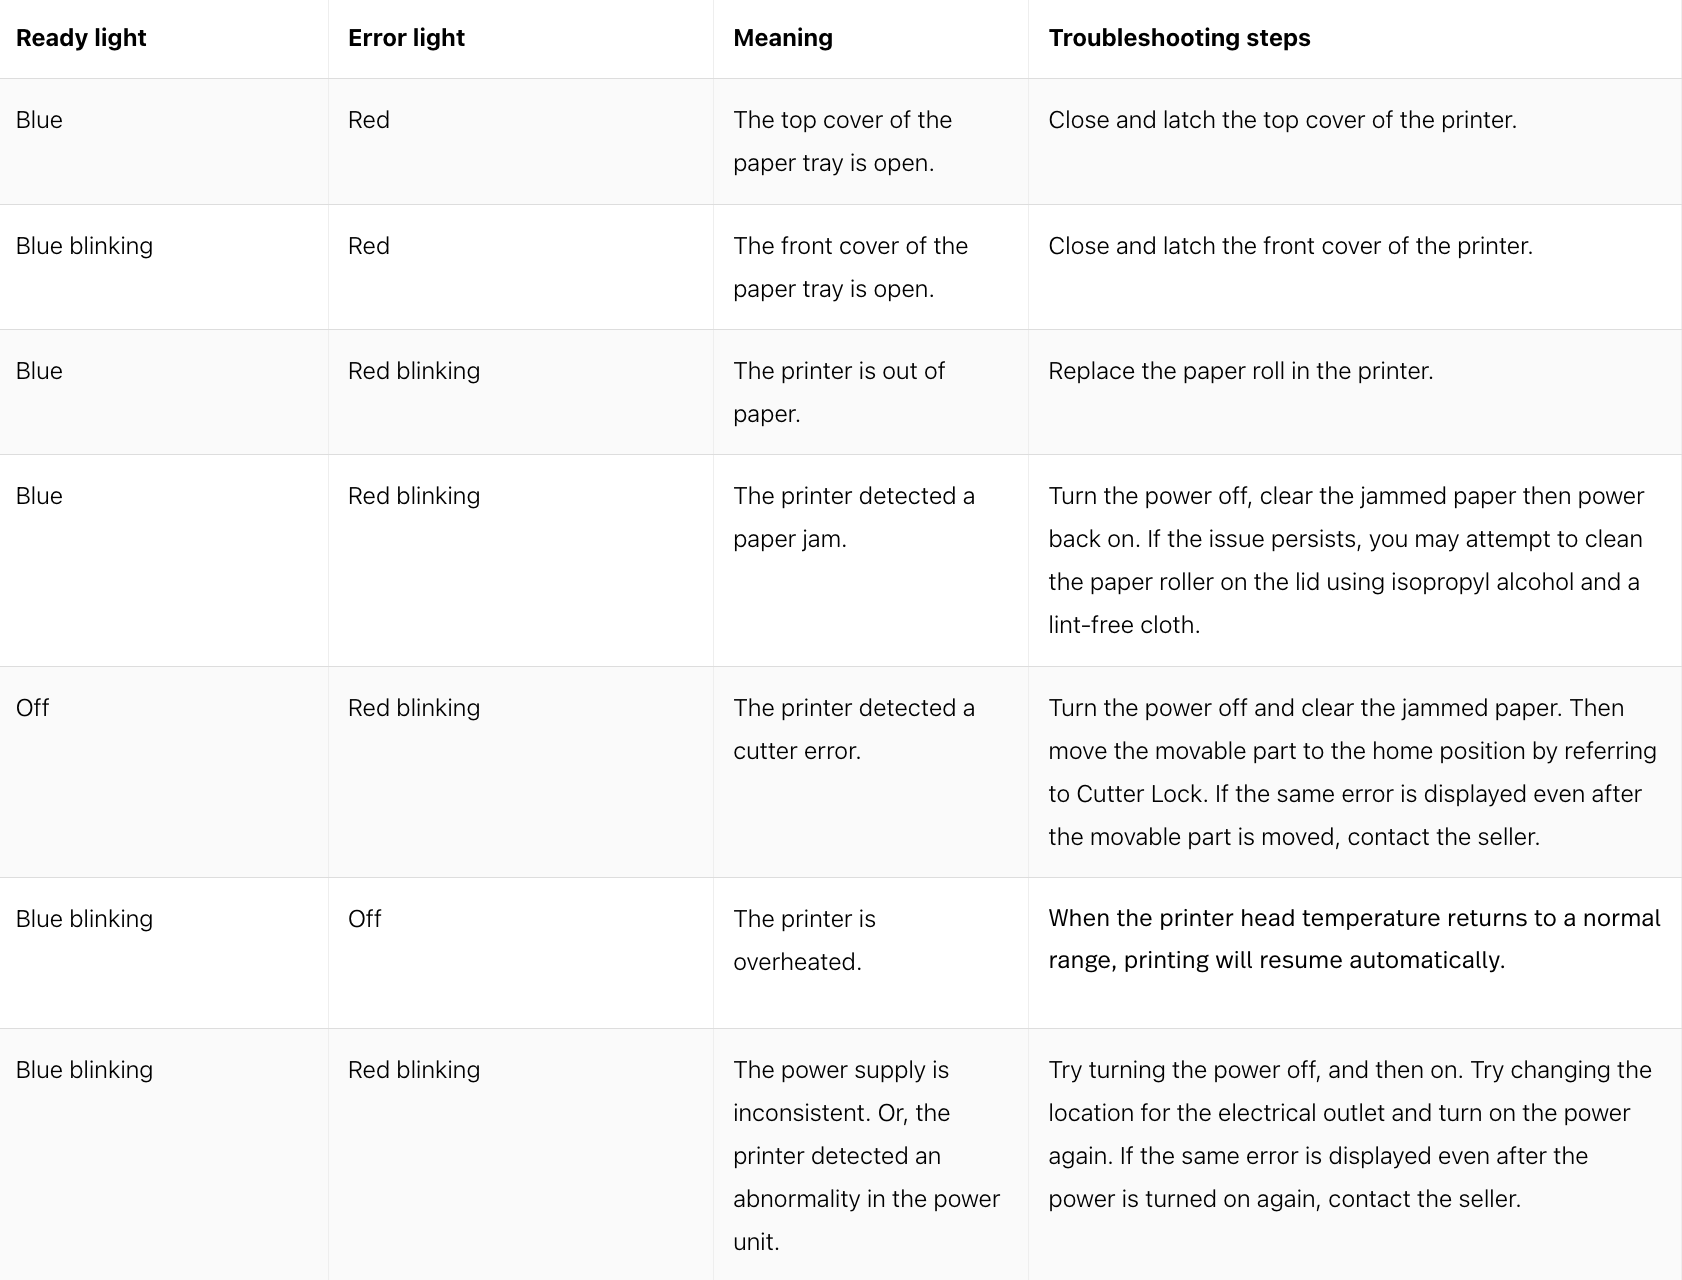 Table of printer light codes, their meanings, and troubleshooting steps.